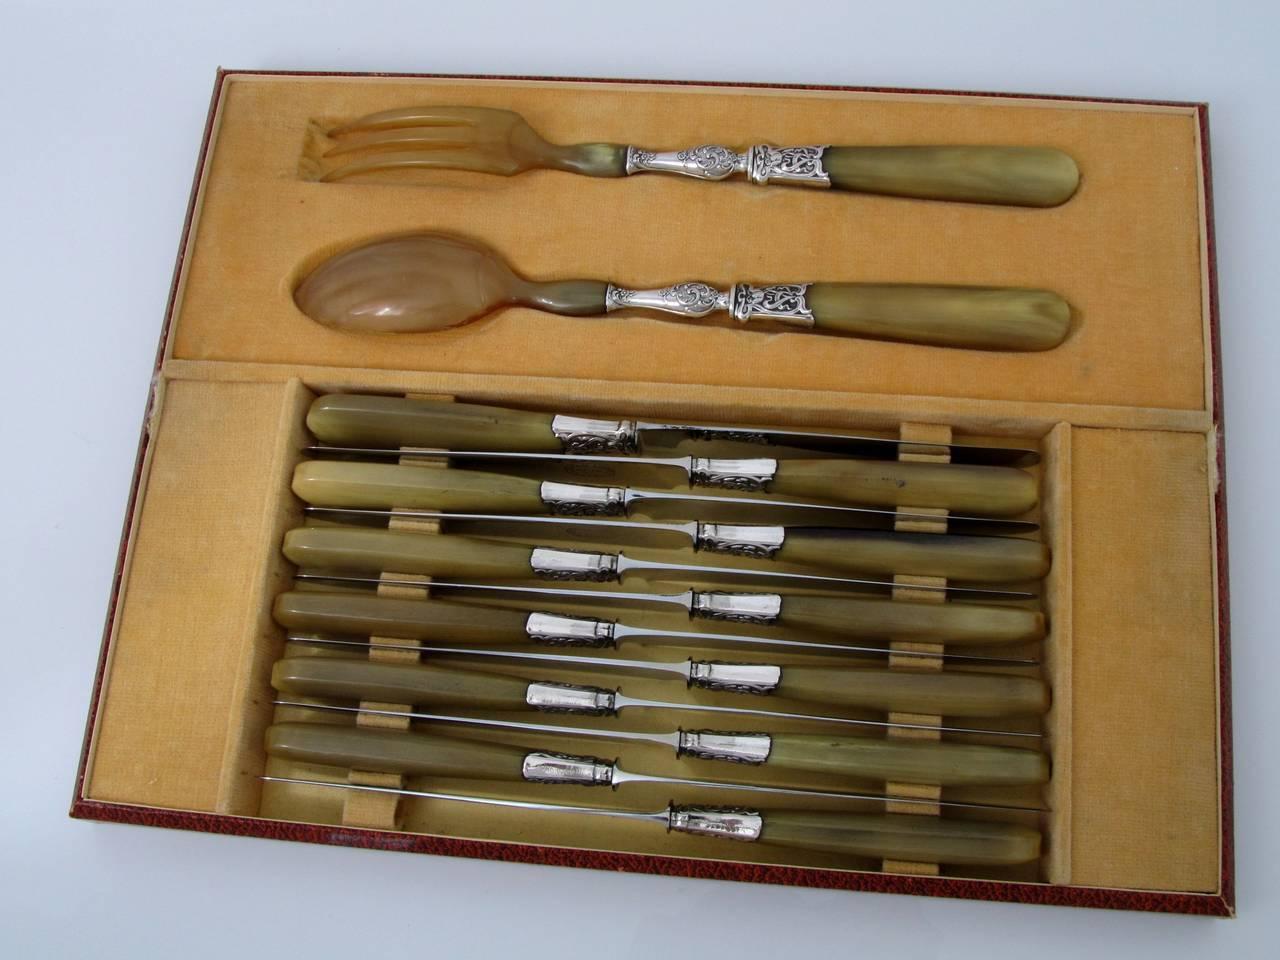 French horn sterling silver table knife set of 24 pieces with matching serving pieces and original box.

Swan marks for 800/1000 French sterling silver guarantee.

Rare Art Nouveau decoration, one of the most sought after models
by lovers of